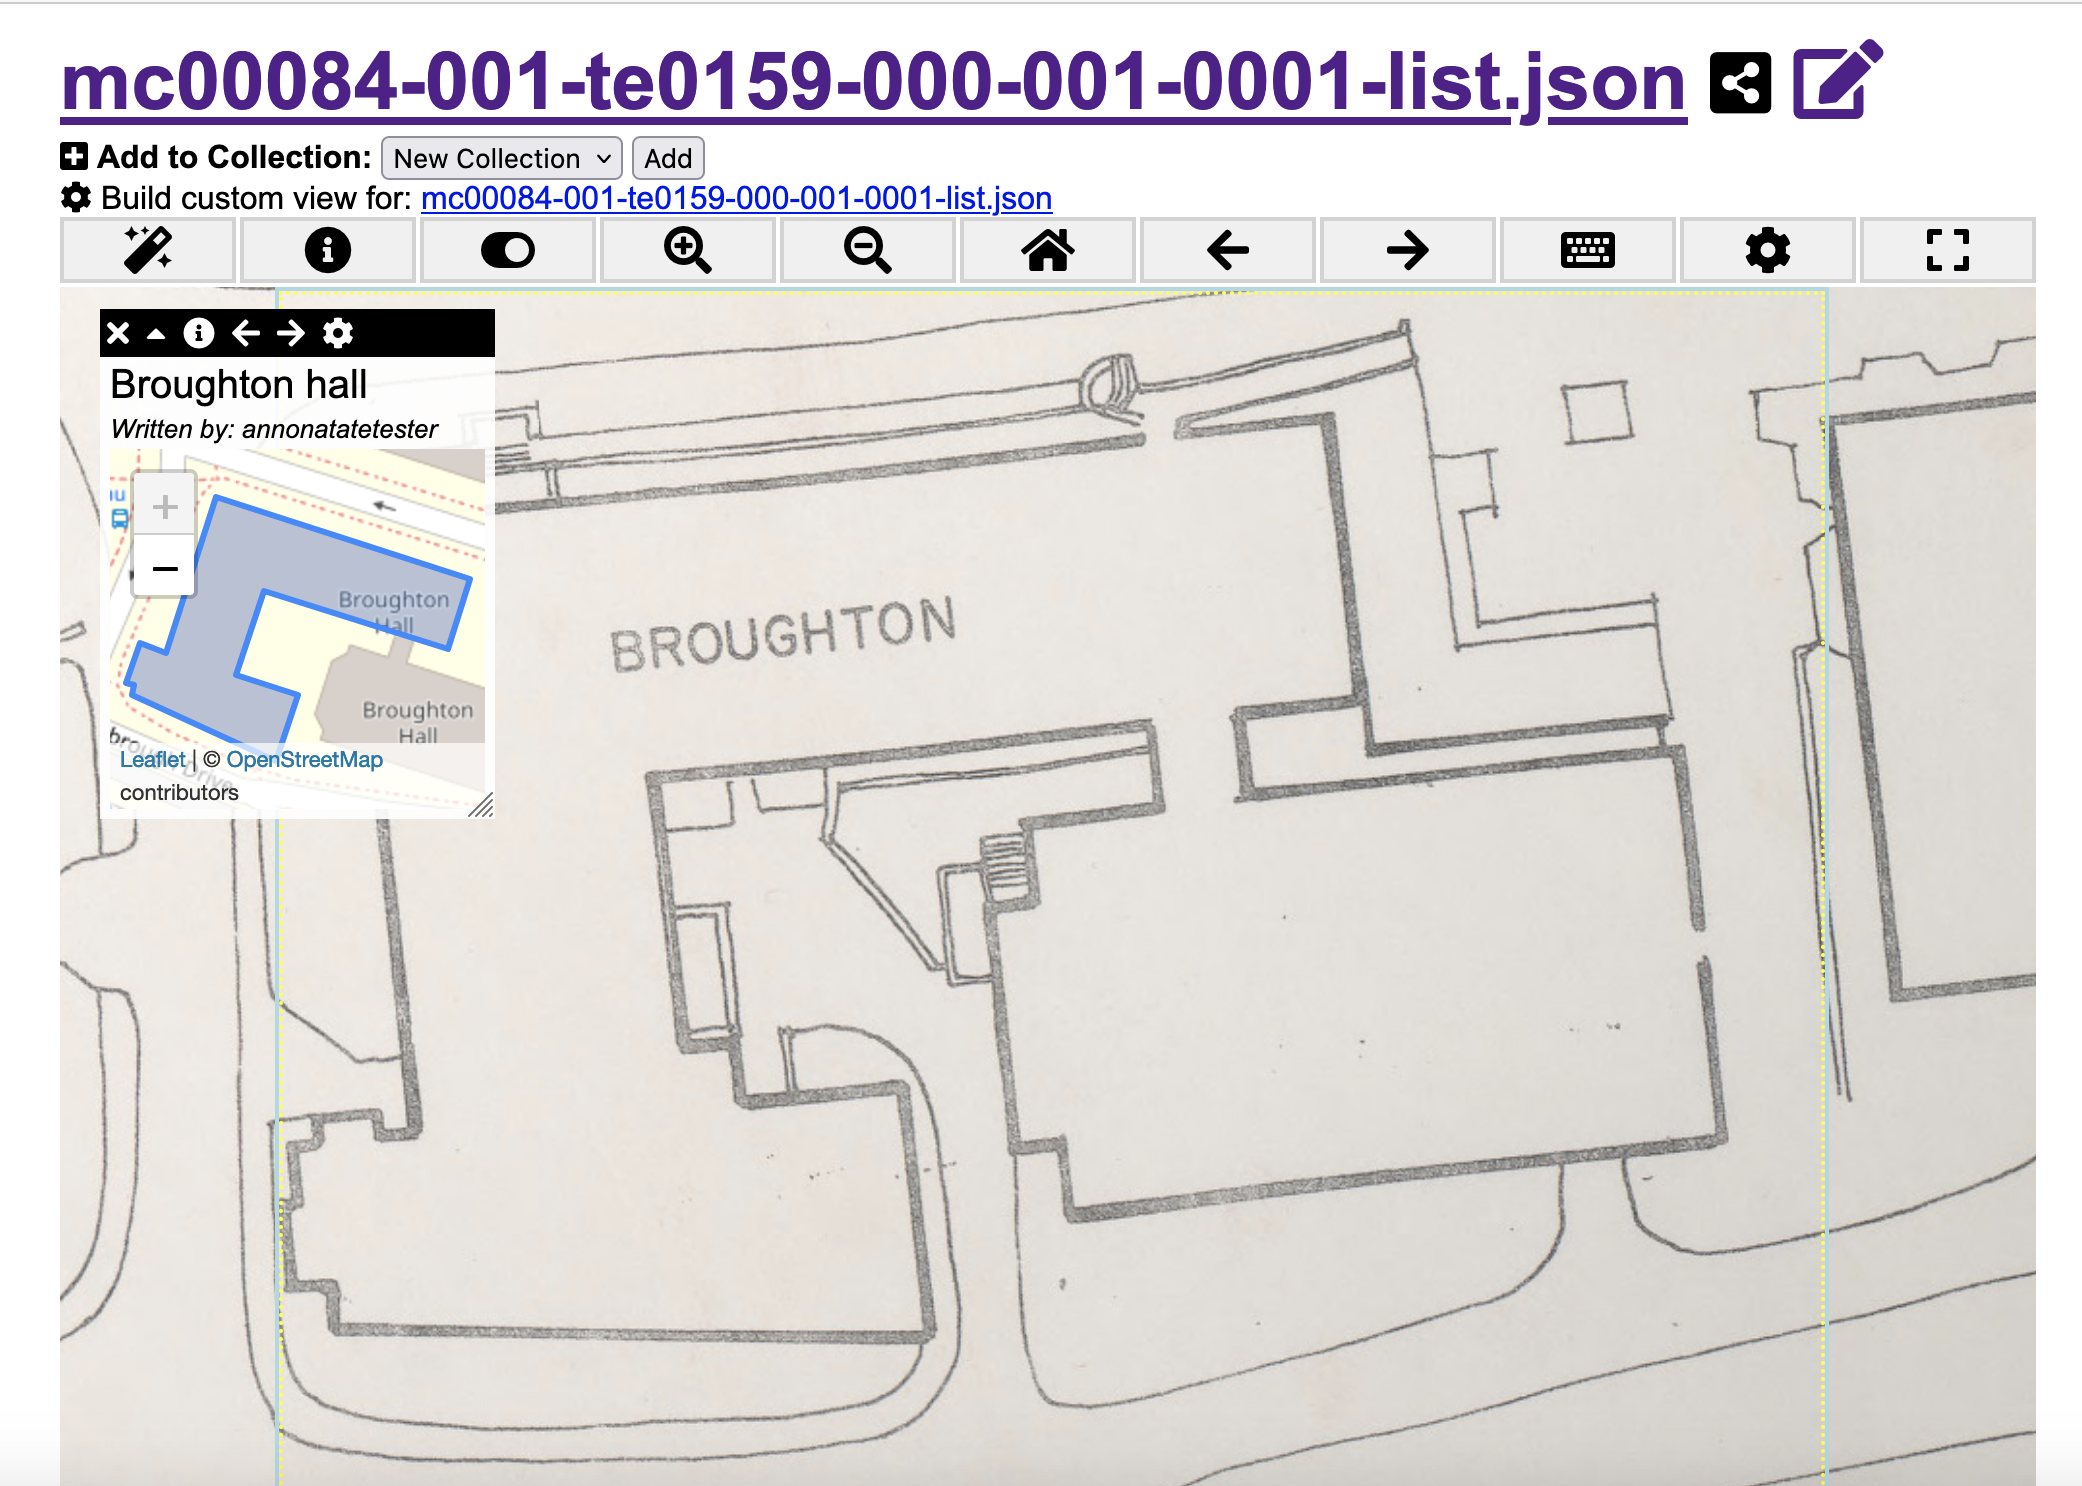 Image showing Broughton hall annotation over image section that was annotated.